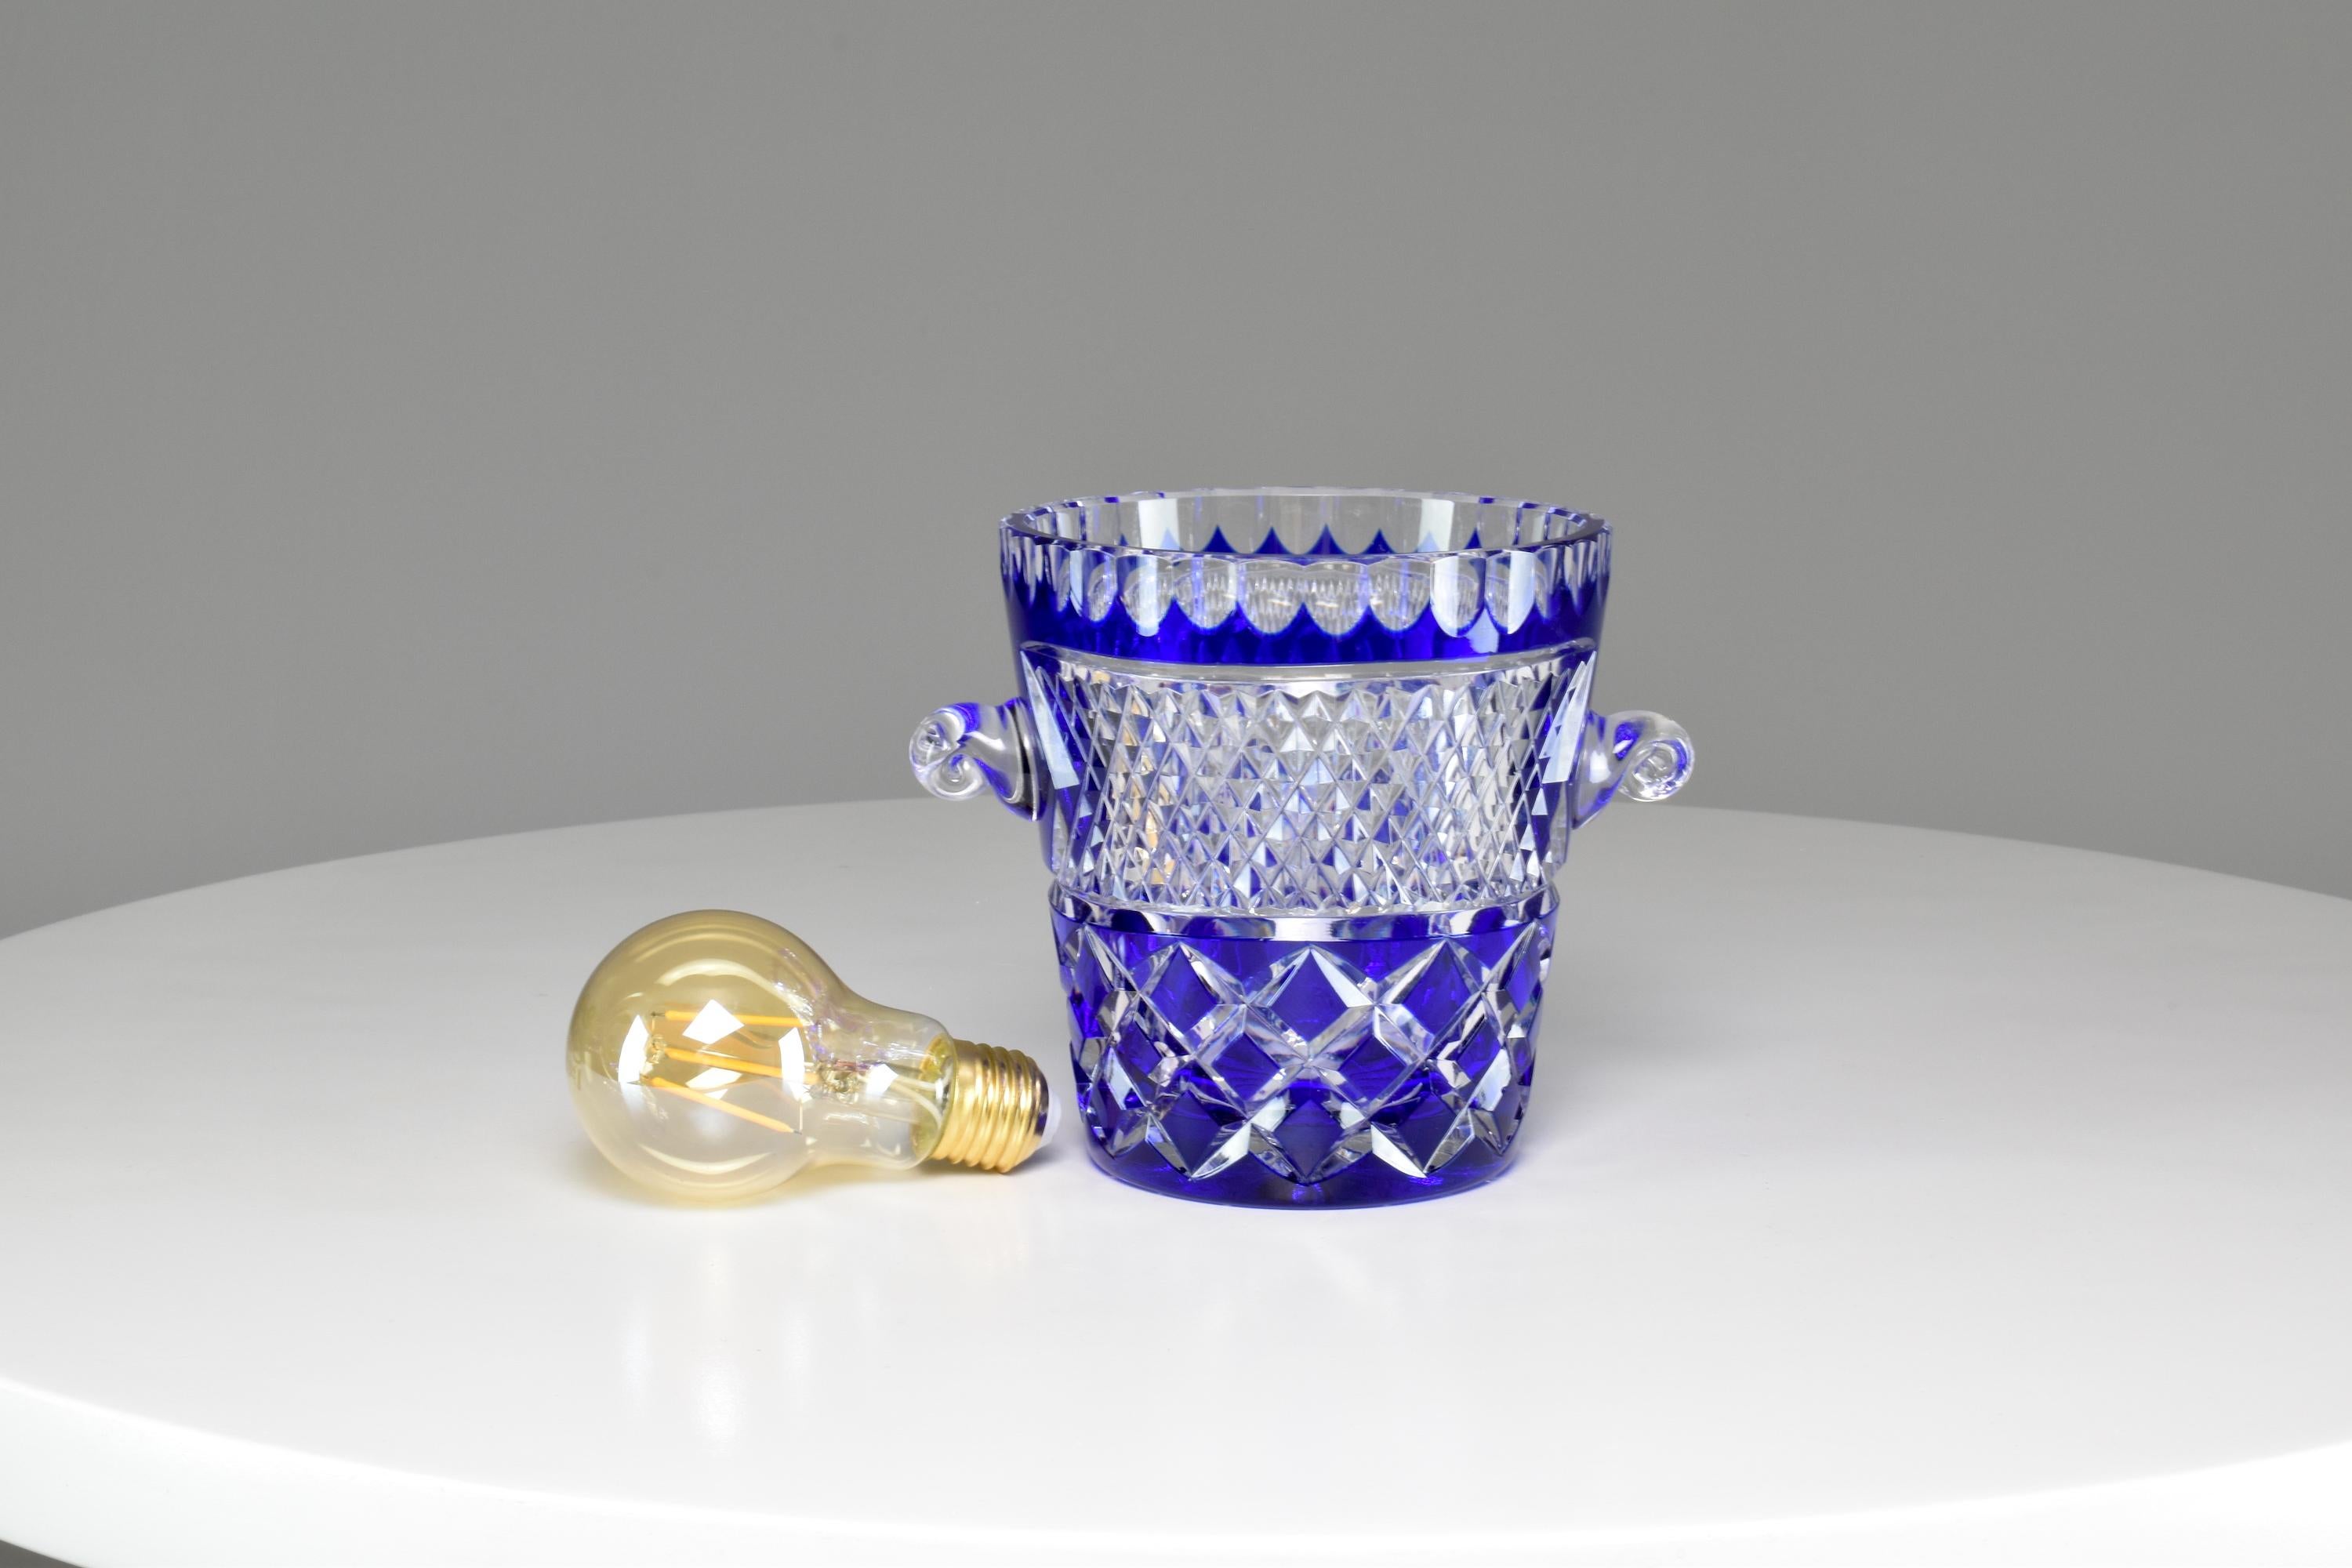 Superb late 20th Century French dark blue Ice or Champagne Bucket by Crystal de Bohême. This statement cut crystal piece comes with a serving ice cube spoon and is brilliantly hand-sculpted. 
-------

We are an exhibition space and an online